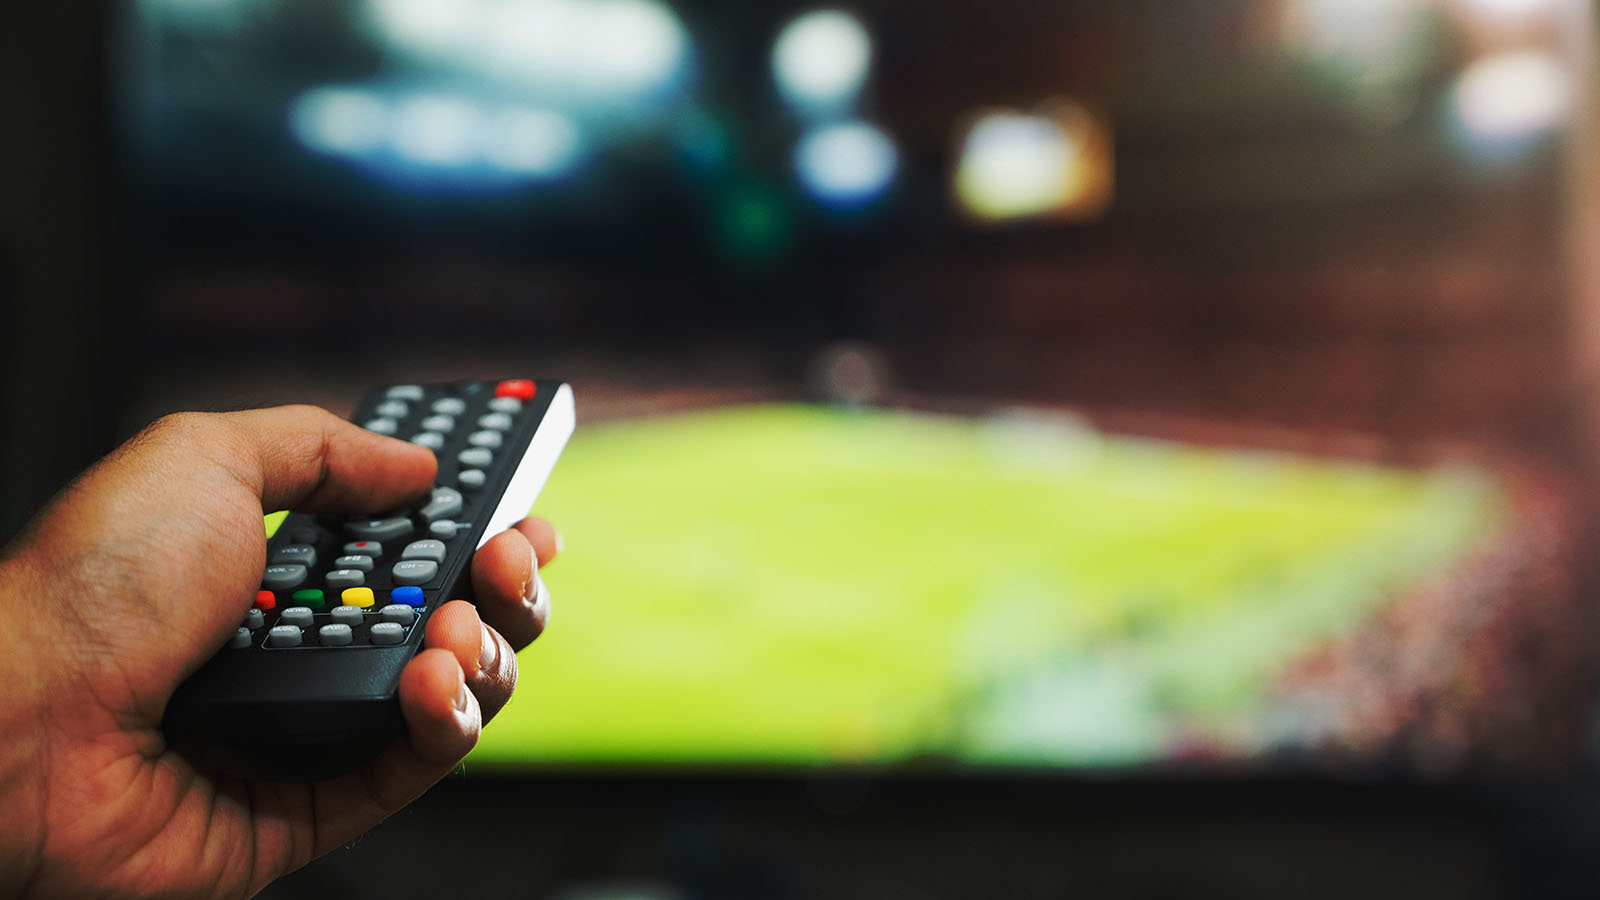 How to watch the Premier League on TV